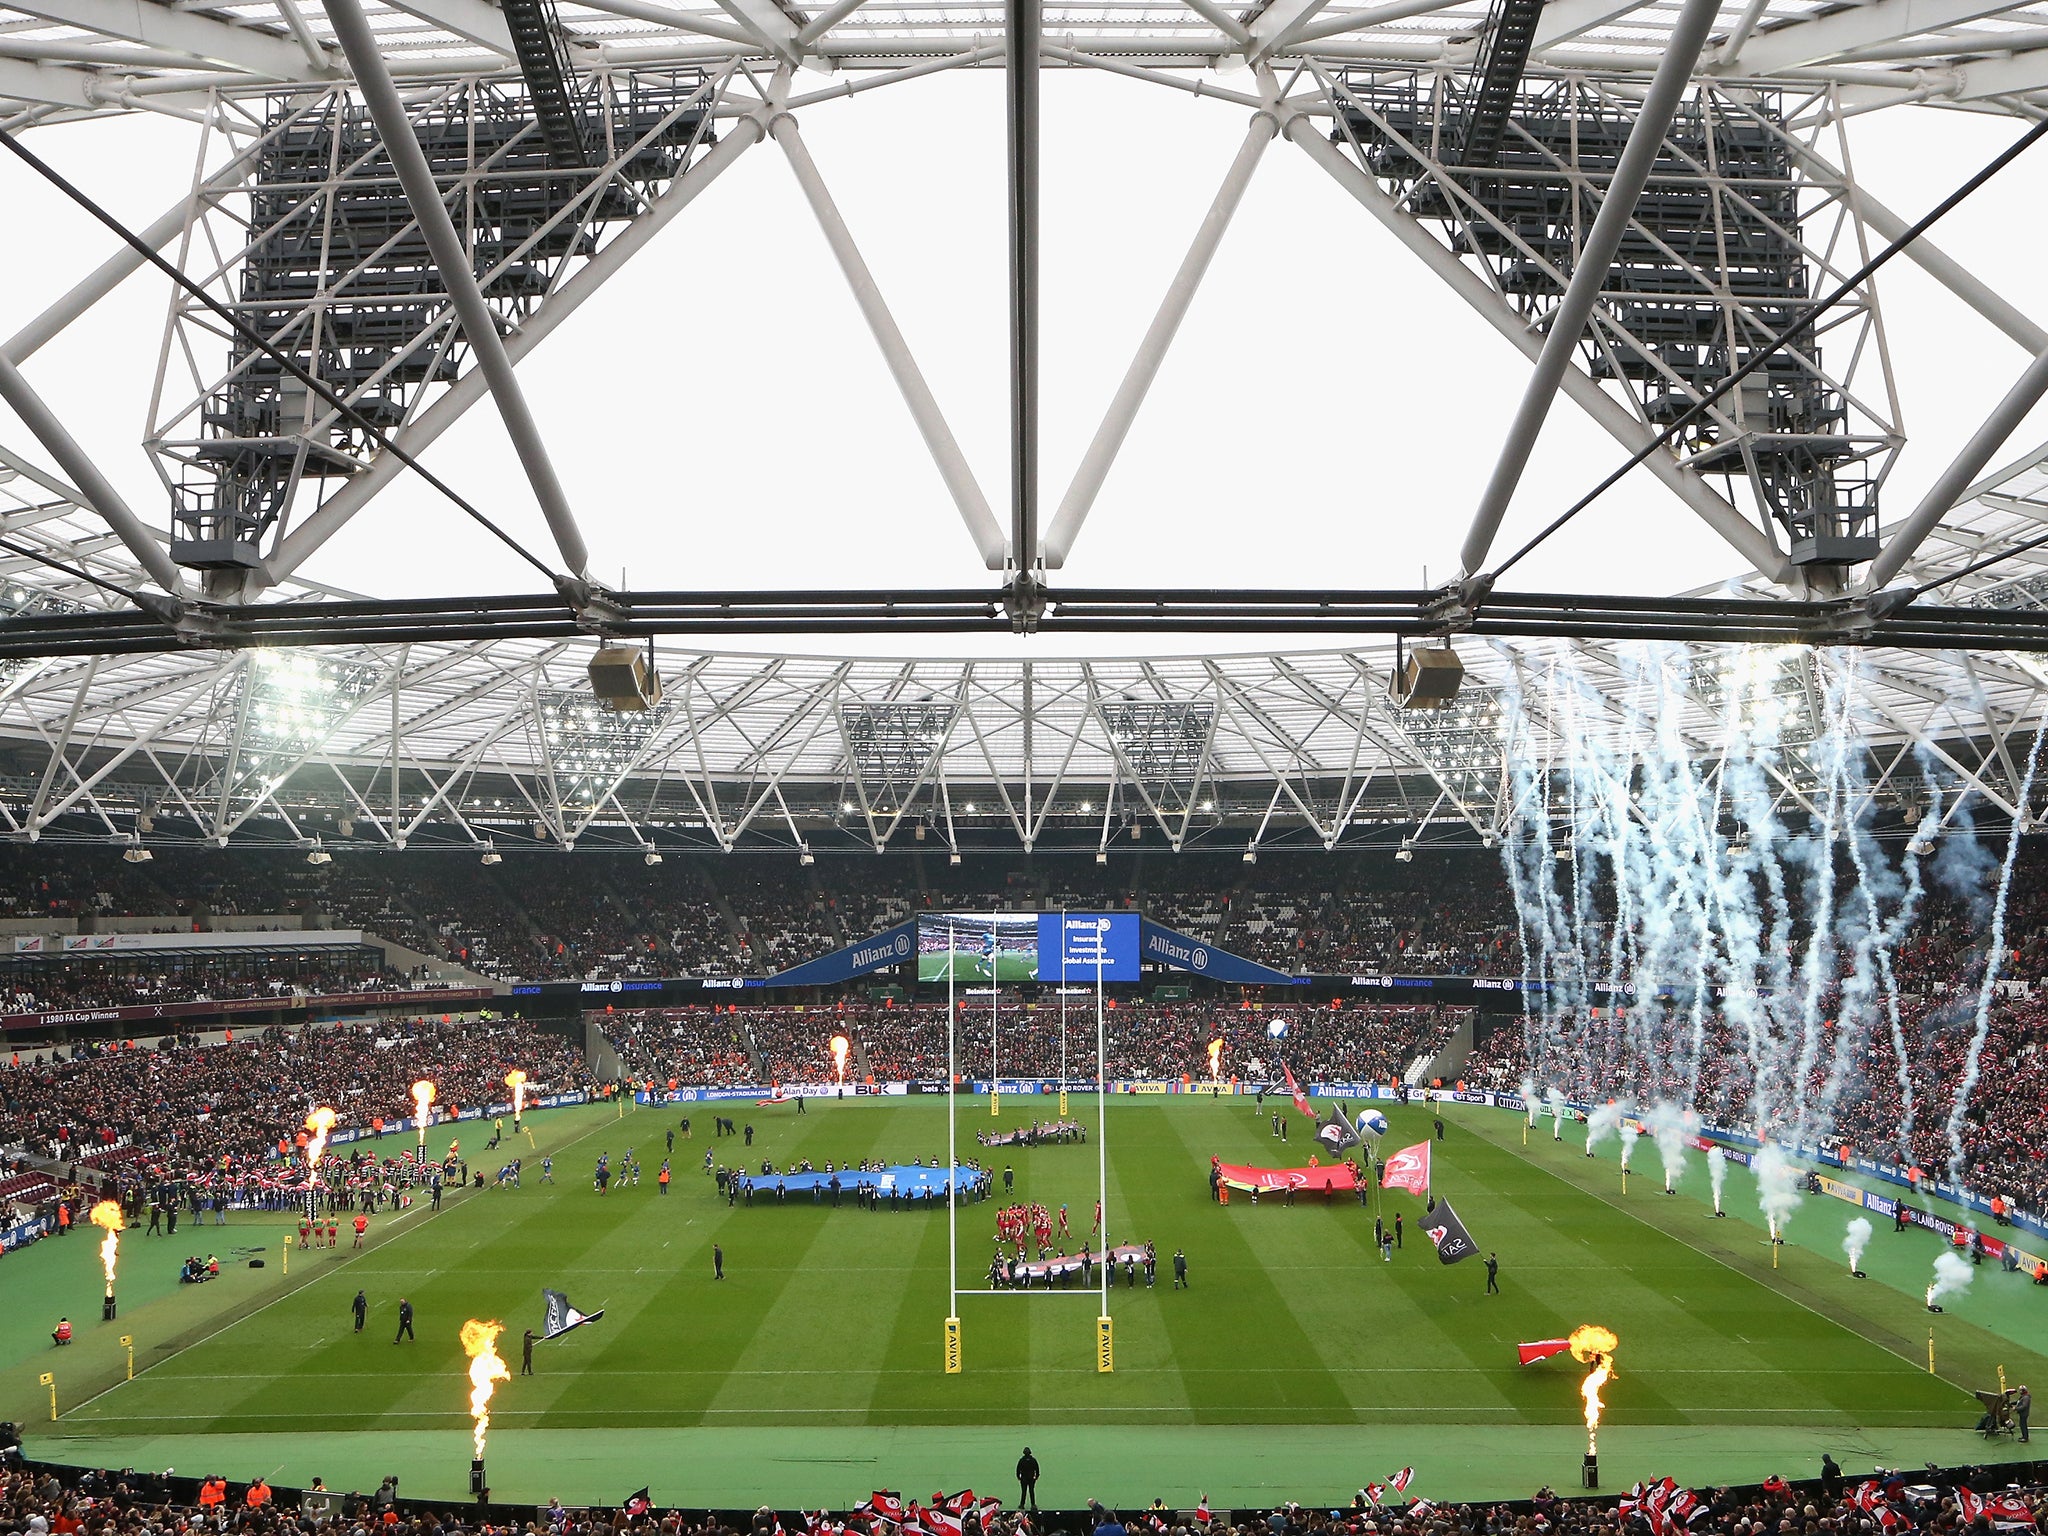 57,000 fans filled the first Premiership game to be held at the London Stadium